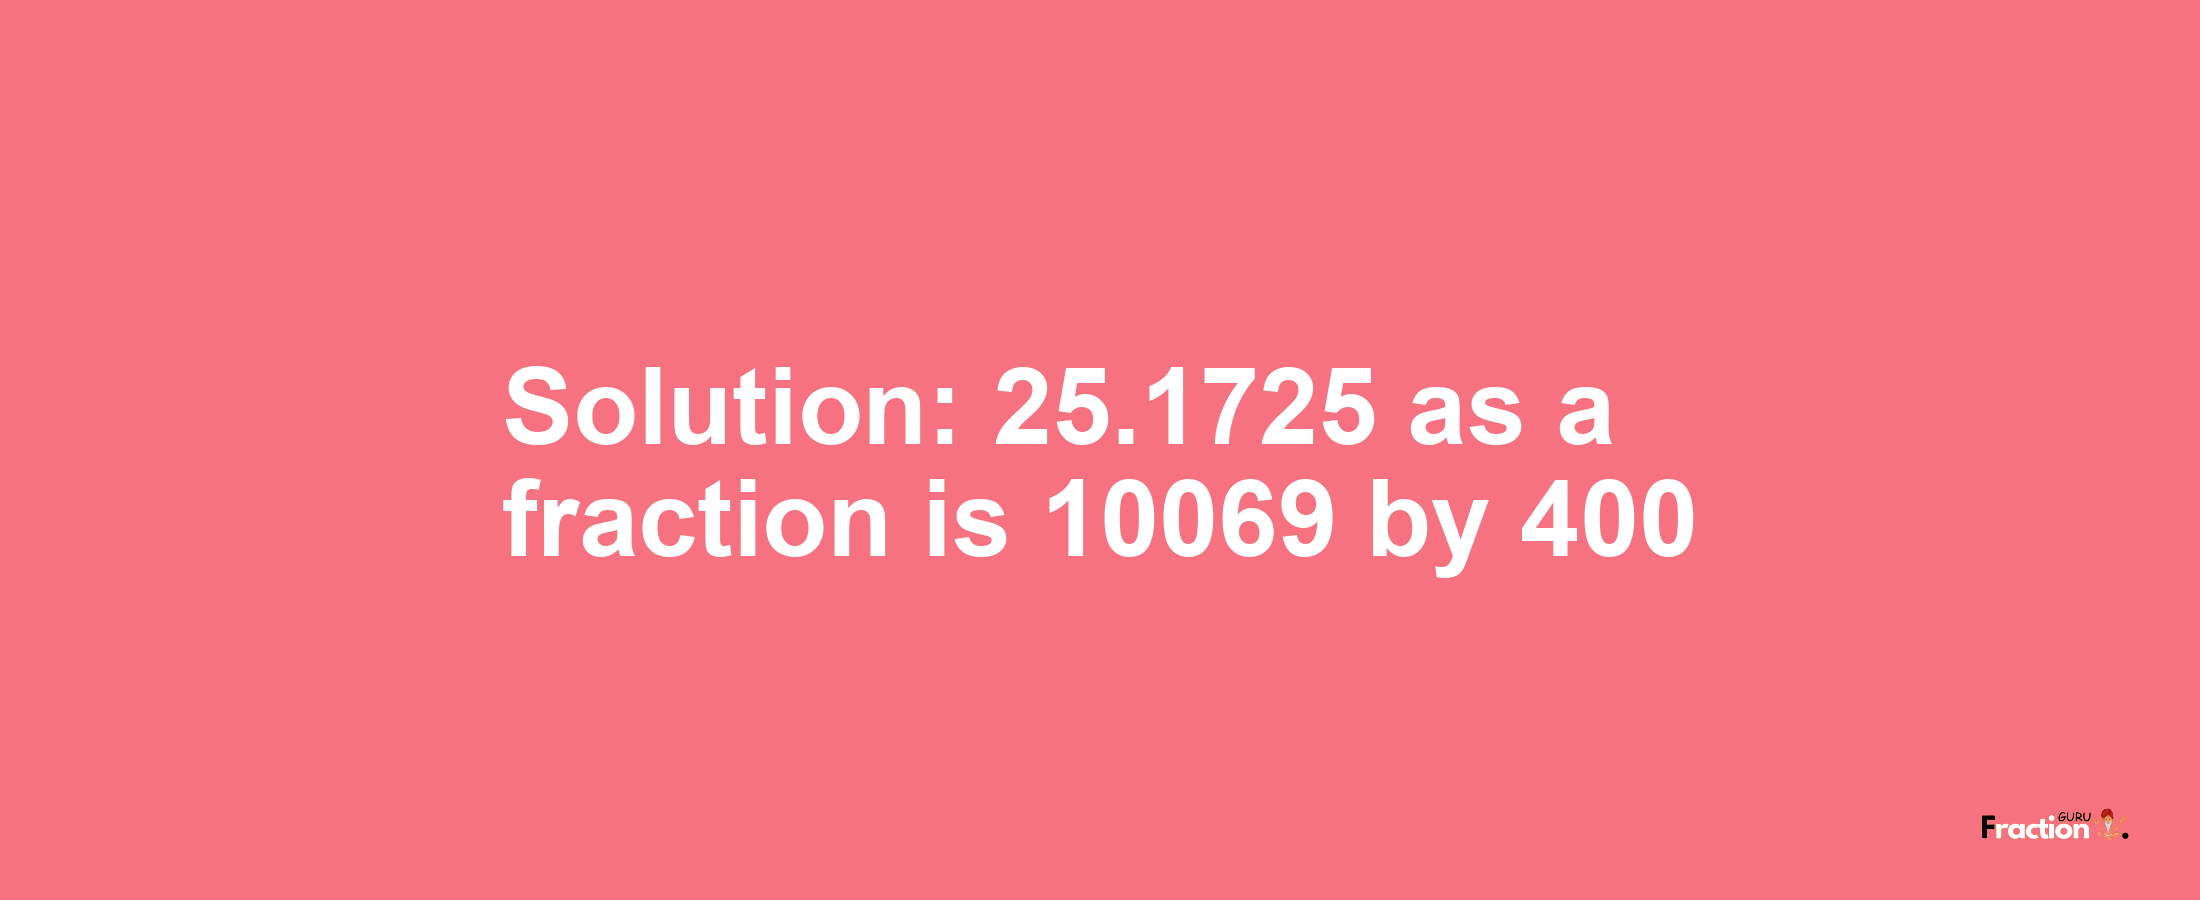 Solution:25.1725 as a fraction is 10069/400